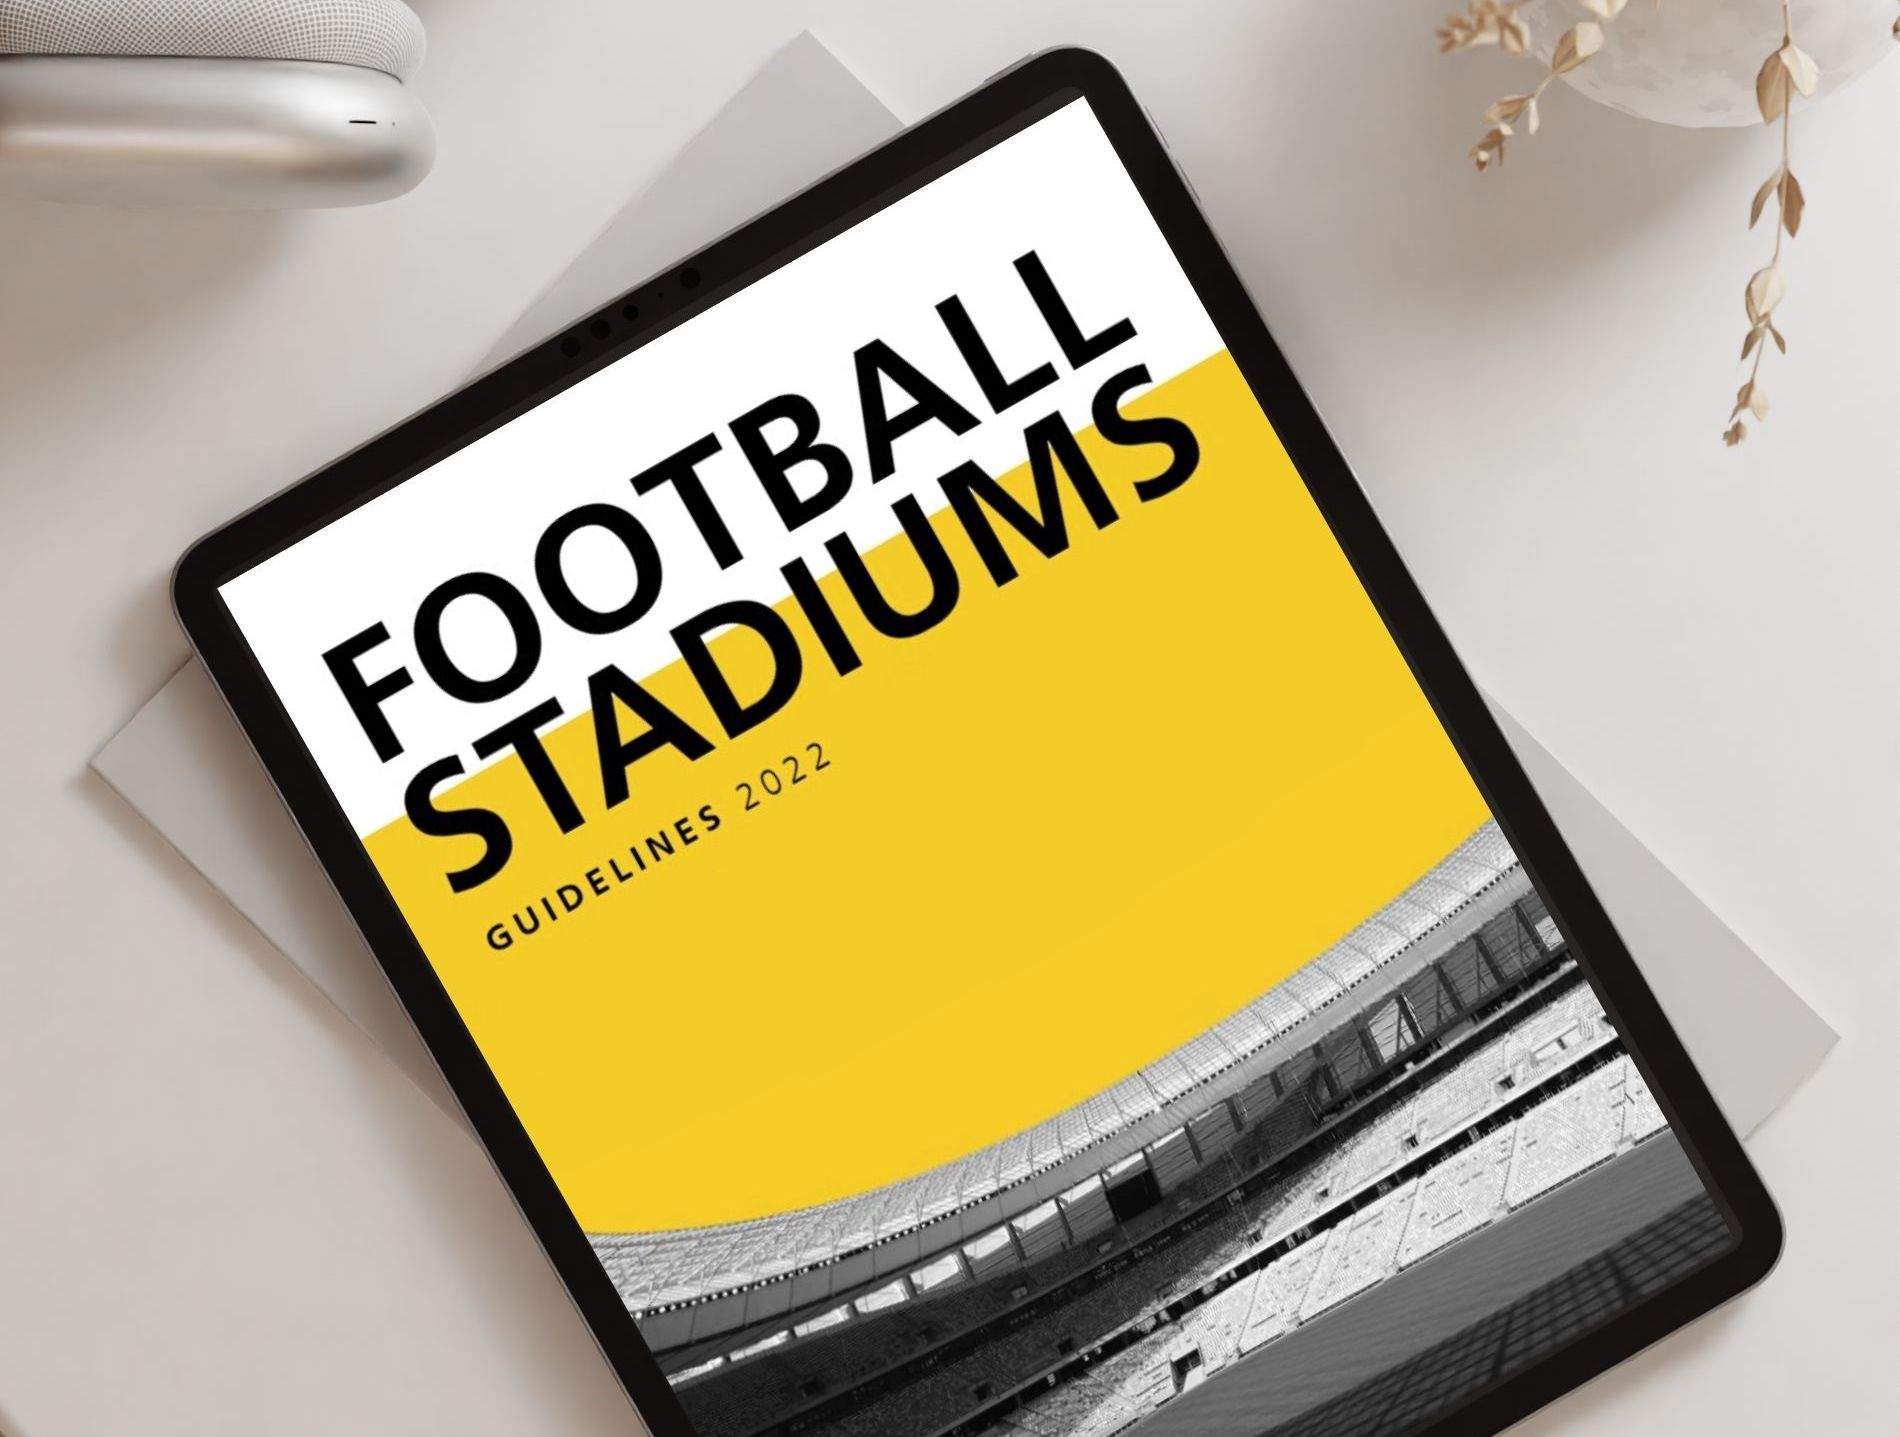 Football Stadiums Guidelines 2022 sustainable operation and maintenance